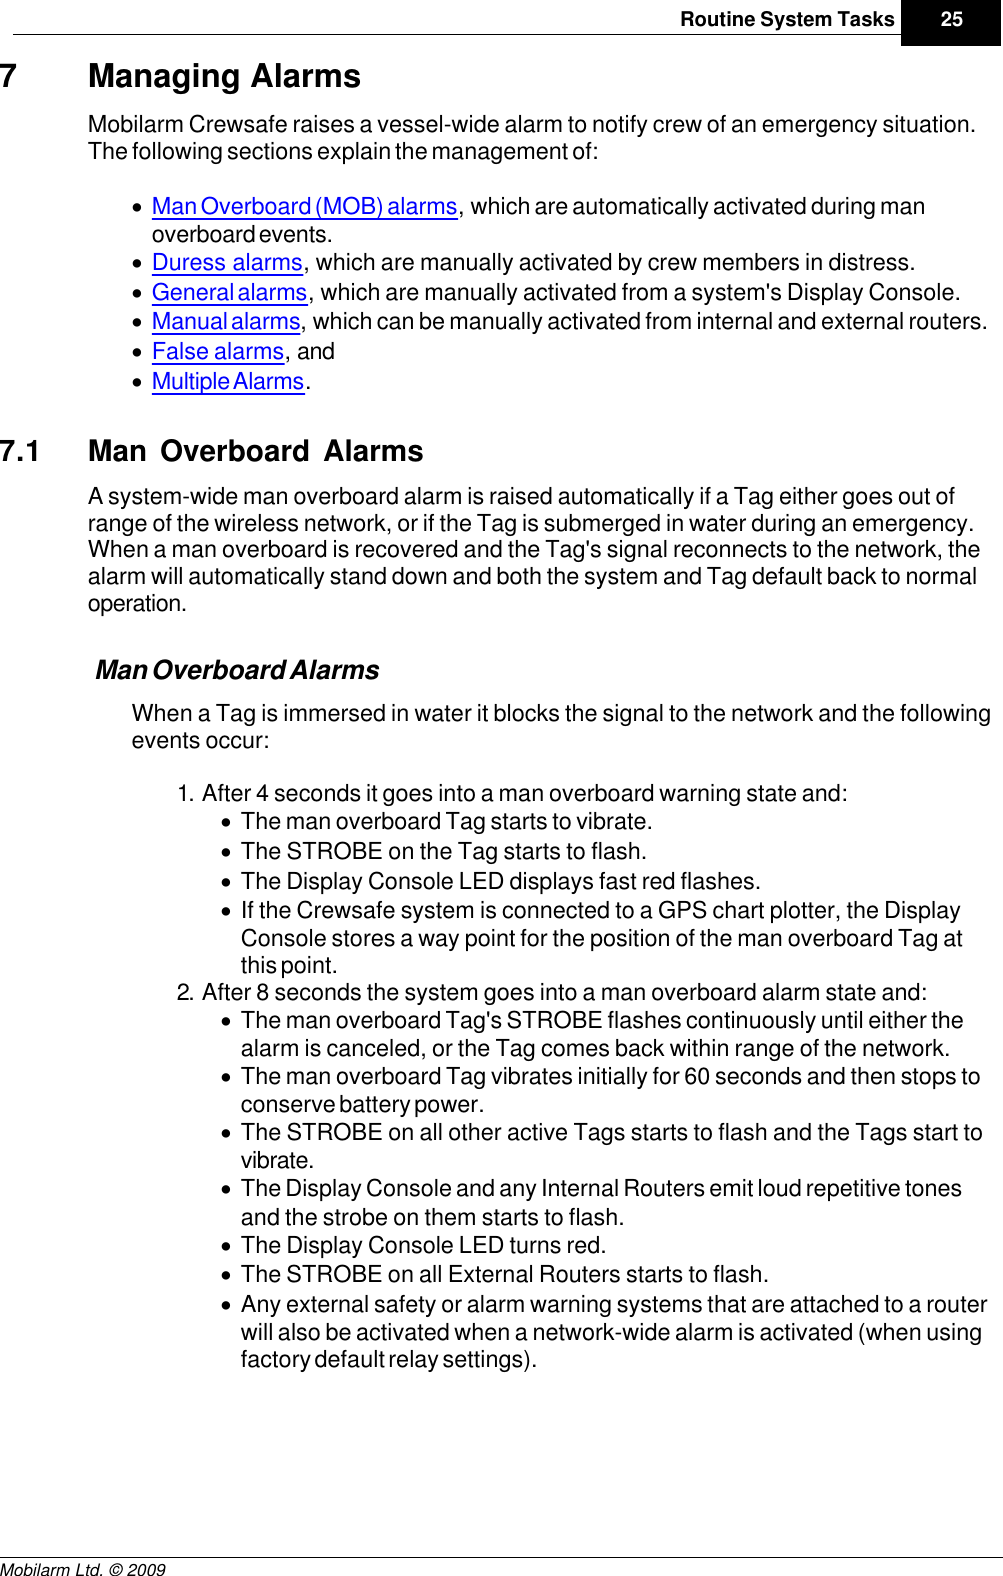 Draft25Routine System TasksMobilarm Ltd. © 20097 Managing AlarmsMobilarm Crewsafe raises a vessel-wide alarm to notify crew of an emergency situation.The following sections explain the management of:·Man Overboard (MOB) alarms, which are automatically activated during manoverboard events.·Duress alarms, which are manually activated by crew members in distress.·General alarms, which are manually activated from a system&apos;s Display Console.·Manual alarms, which can be manually activated from internal and external routers.·False alarms, and ·Multiple Alarms.7.1 Man Overboard AlarmsA system-wide man overboard alarm is raised automatically if a Tag either goes out ofrange of the wireless network, or if the Tag is submerged in water during an emergency.When a man overboard is recovered and the Tag&apos;s signal reconnects to the network, thealarm will automatically stand down and both the system and Tag default back to normaloperation.Man Overboard AlarmsWhen a Tag is immersed in water it blocks the signal to the network and the followingevents occur:1. After 4 seconds it goes into a man overboard warning state and: ·The man overboard Tag starts to vibrate.·The STROBE on the Tag starts to flash.·The Display Console LED displays fast red flashes.·If the Crewsafe system is connected to a GPS chart plotter, the DisplayConsole stores a way point for the position of the man overboard Tag atthis point.2. After 8 seconds the system goes into a man overboard alarm state and:·The man overboard Tag&apos;s STROBE flashes continuously until either thealarm is canceled, or the Tag comes back within range of the network.·The man overboard Tag vibrates initially for 60 seconds and then stops toconserve battery power.·The STROBE on all other active Tags starts to flash and the Tags start tovibrate.·The Display Console and any Internal Routers emit loud repetitive tonesand the strobe on them starts to flash.·The Display Console LED turns red.·The STROBE on all External Routers starts to flash.·Any external safety or alarm warning systems that are attached to a routerwill also be activated when a network-wide alarm is activated (when usingfactory default relay settings). 